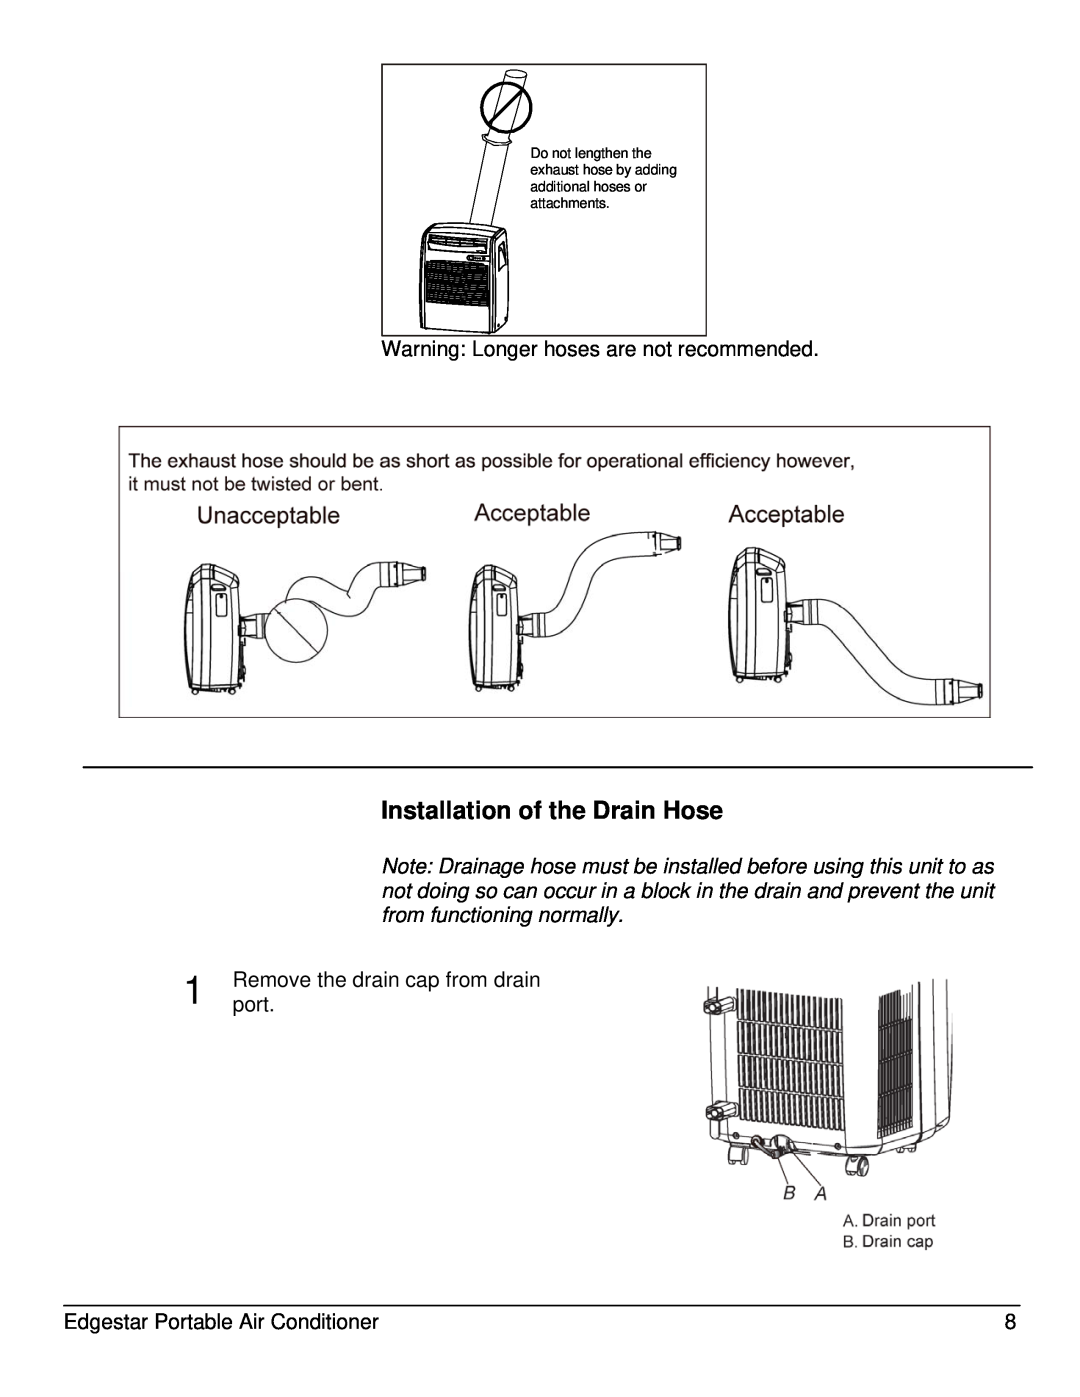 EdgeStar AP10002BL owner manual Installation of the Drain Hose, Warning Longer hoses are not recommended 